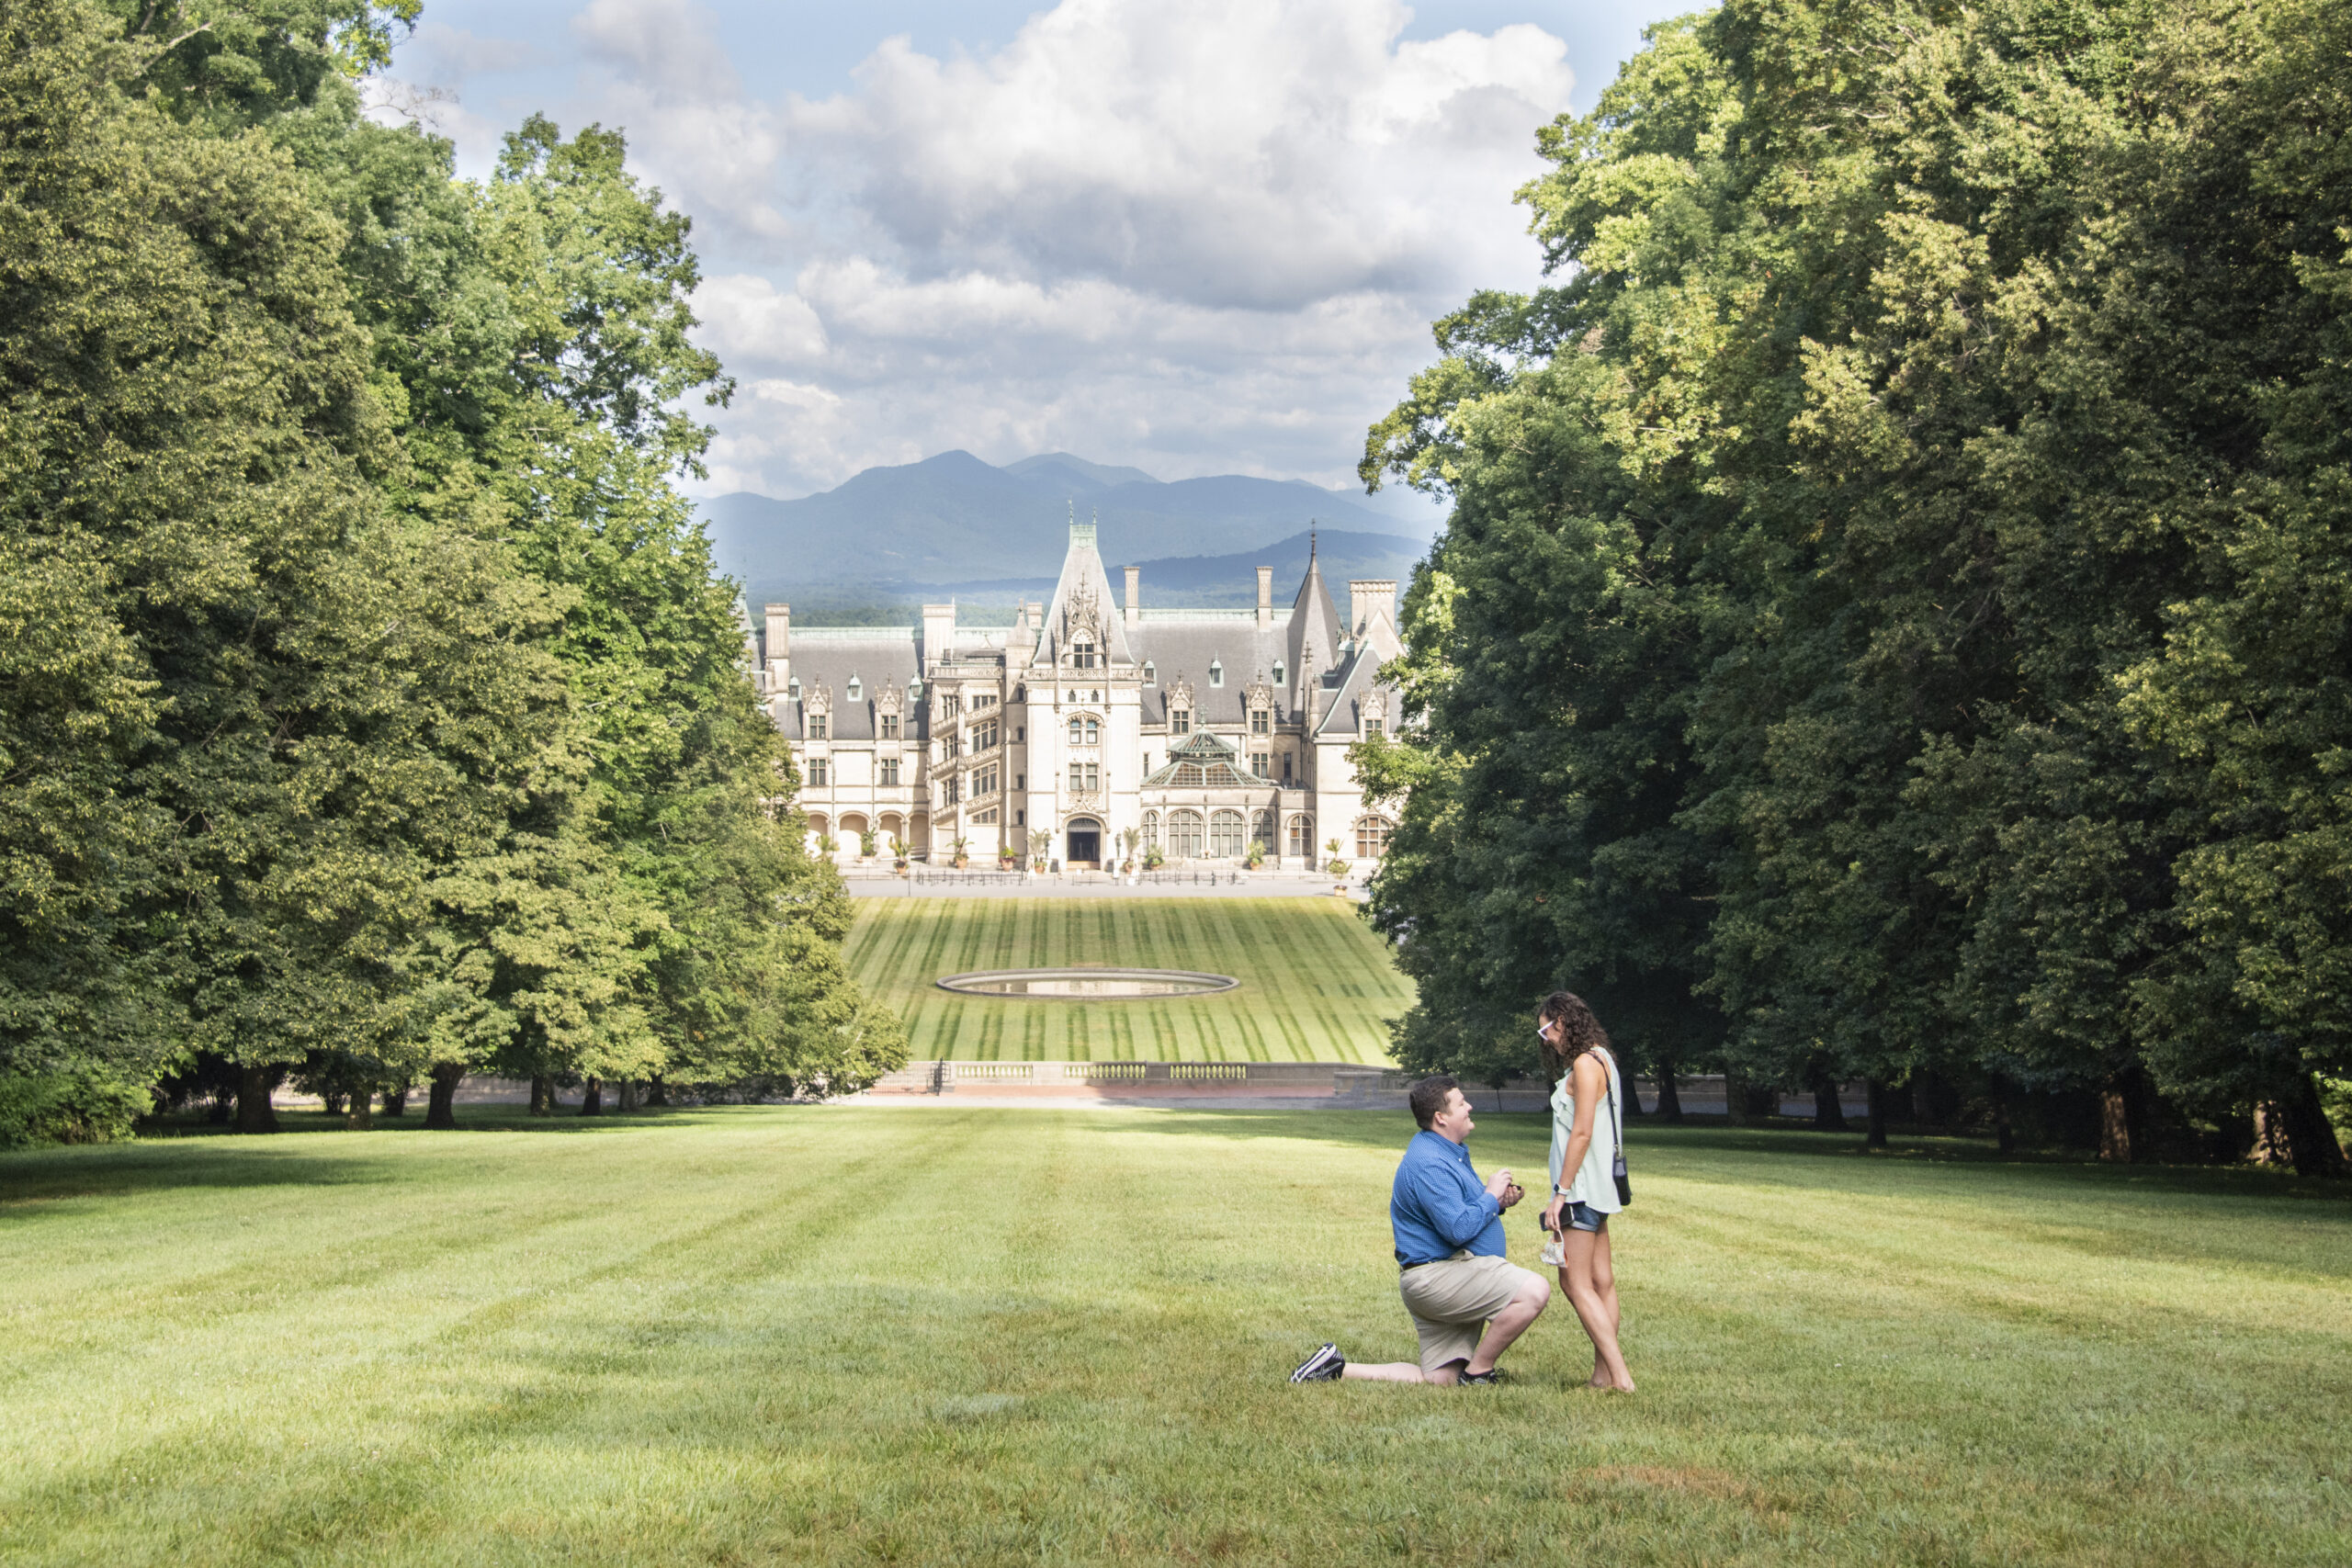 Man proposing to woman at Biltmore Estate in Asheville, NC with mountain views